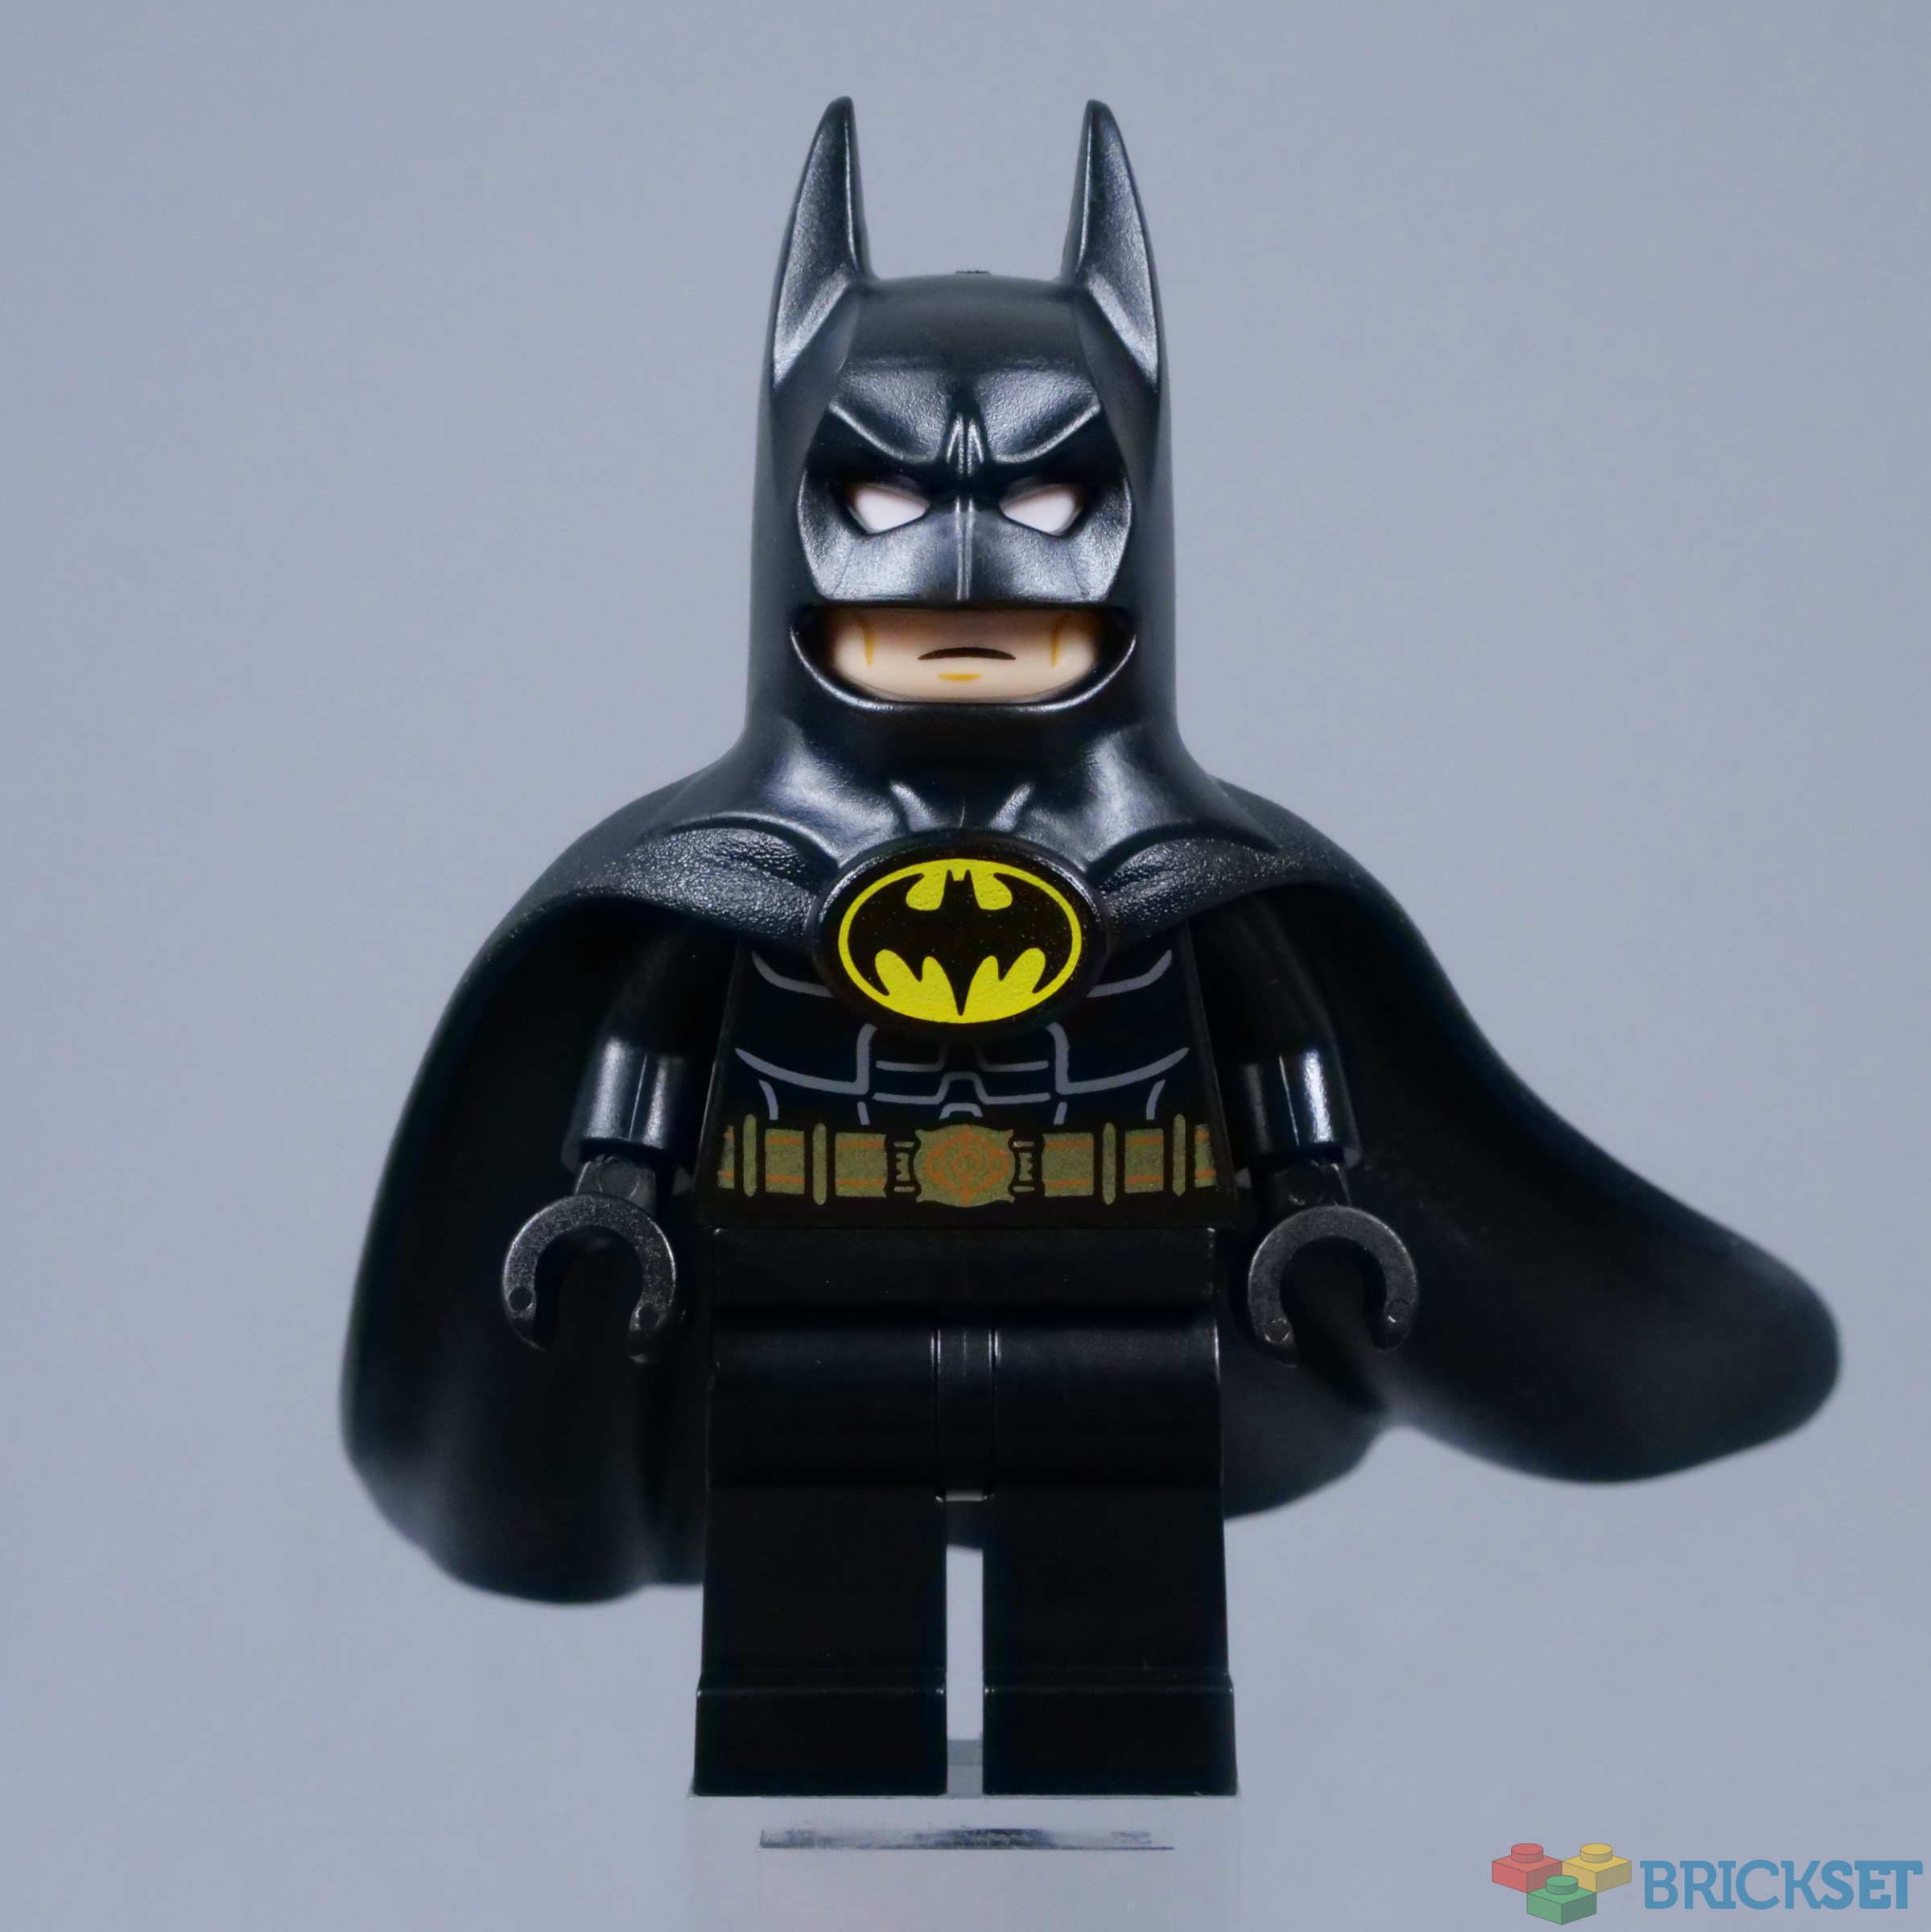 batman, My version of the batman ** CREDIT TO LEGO FOR THE …